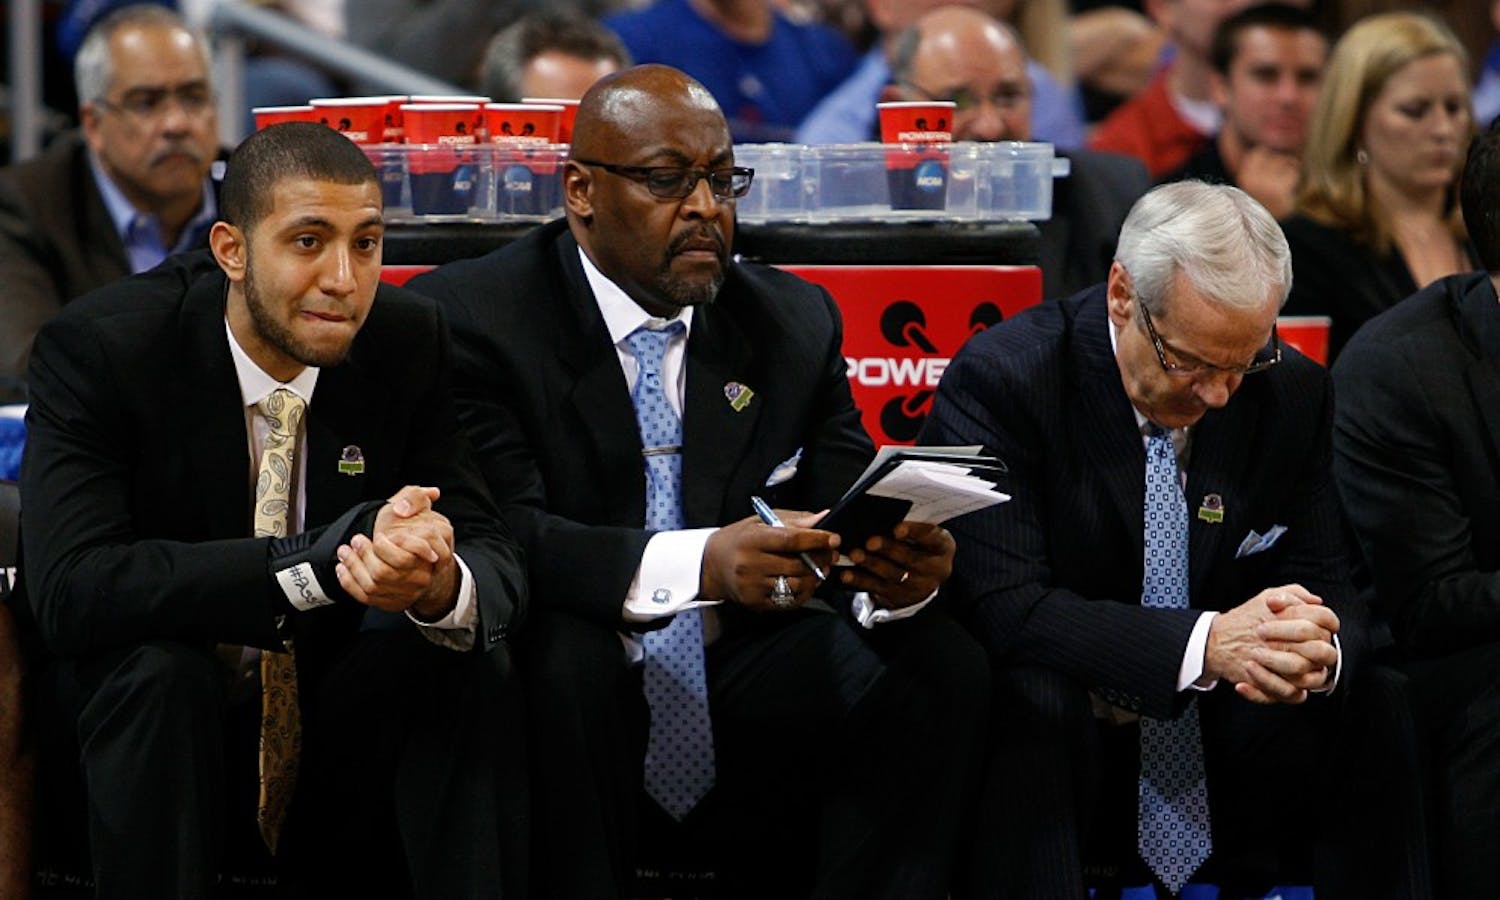 UNC guard Kendall Marshall, assistant coach Steve Robinson and head coach Roy Williams watch nervously from the bench as time winds down. The Tar Heels defeated Ohio 73-65 in overtime at the Edward Jones Dome in St. Louis on Friday in the Sweet 16 round of the NCAA Tournament.